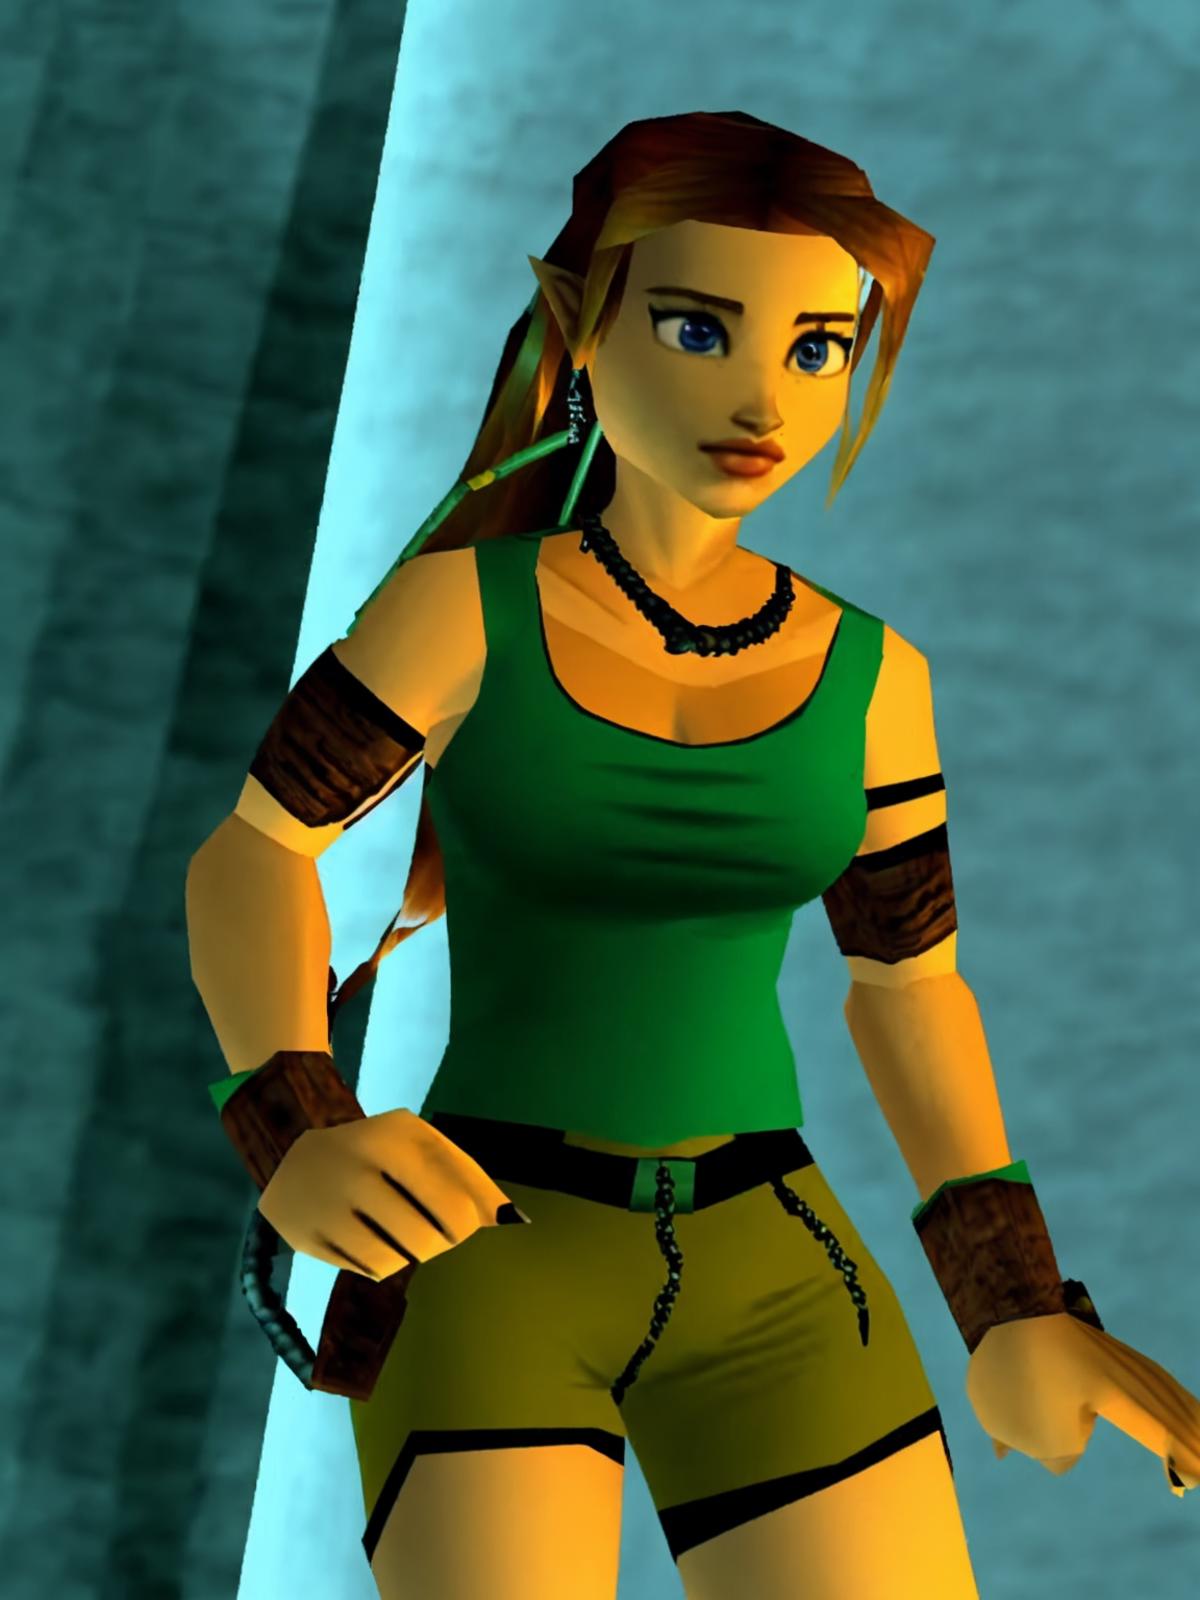 A computer generated female character wearing green clothing and jewelry.